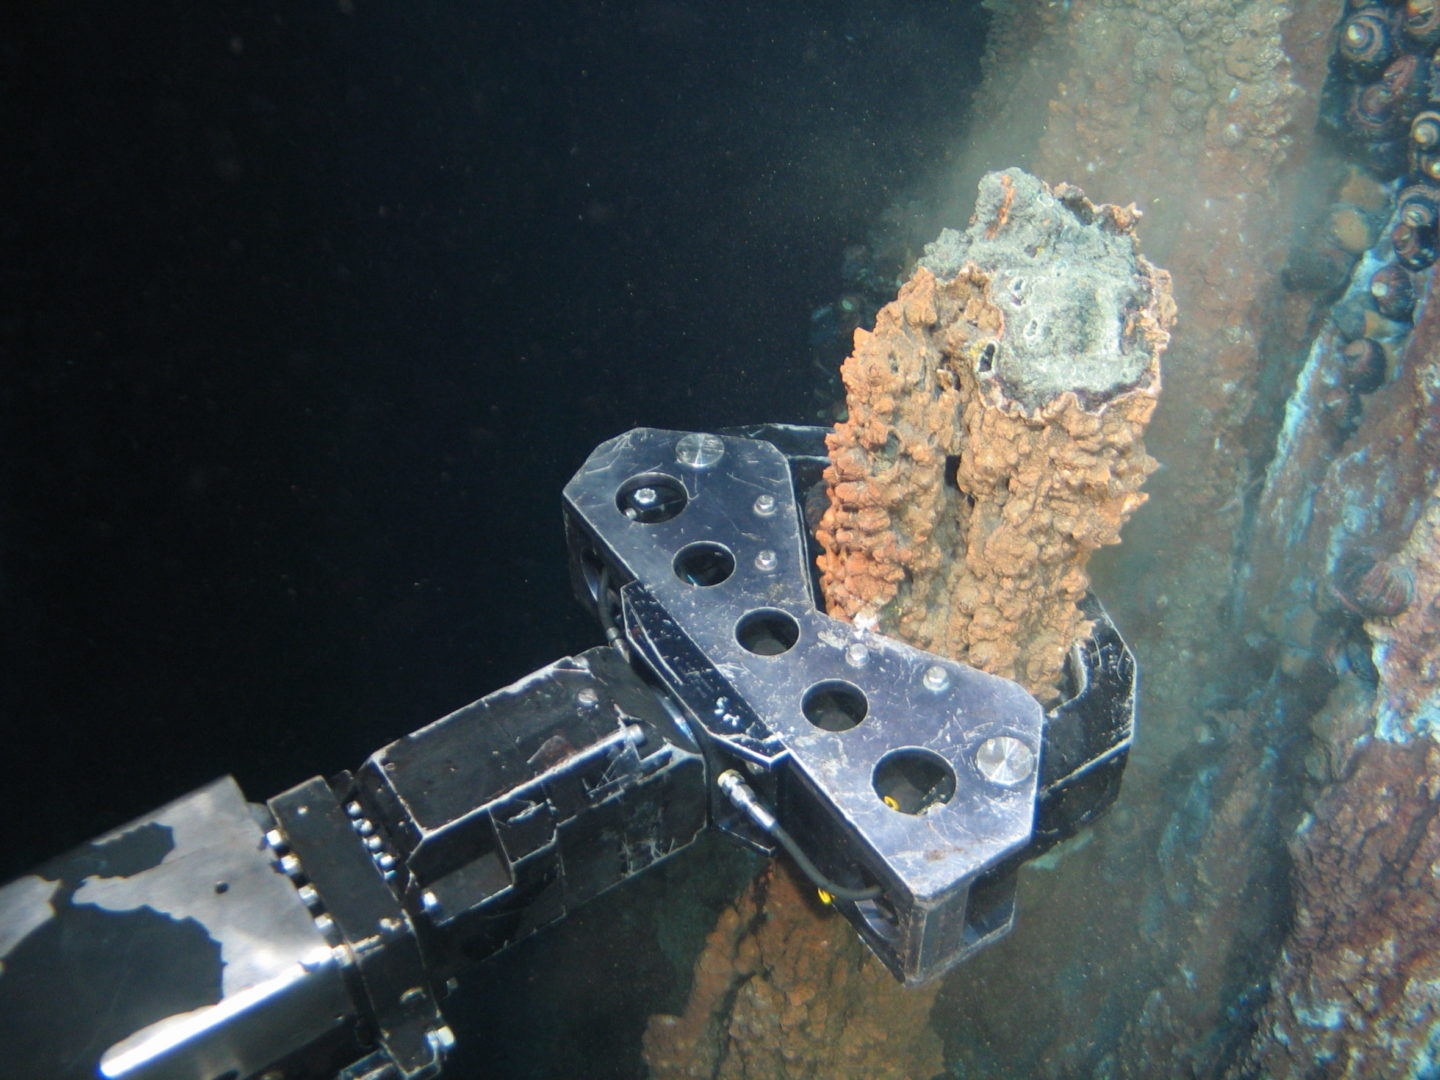 Underwater copper rich chimney sampling, part of seabed mining